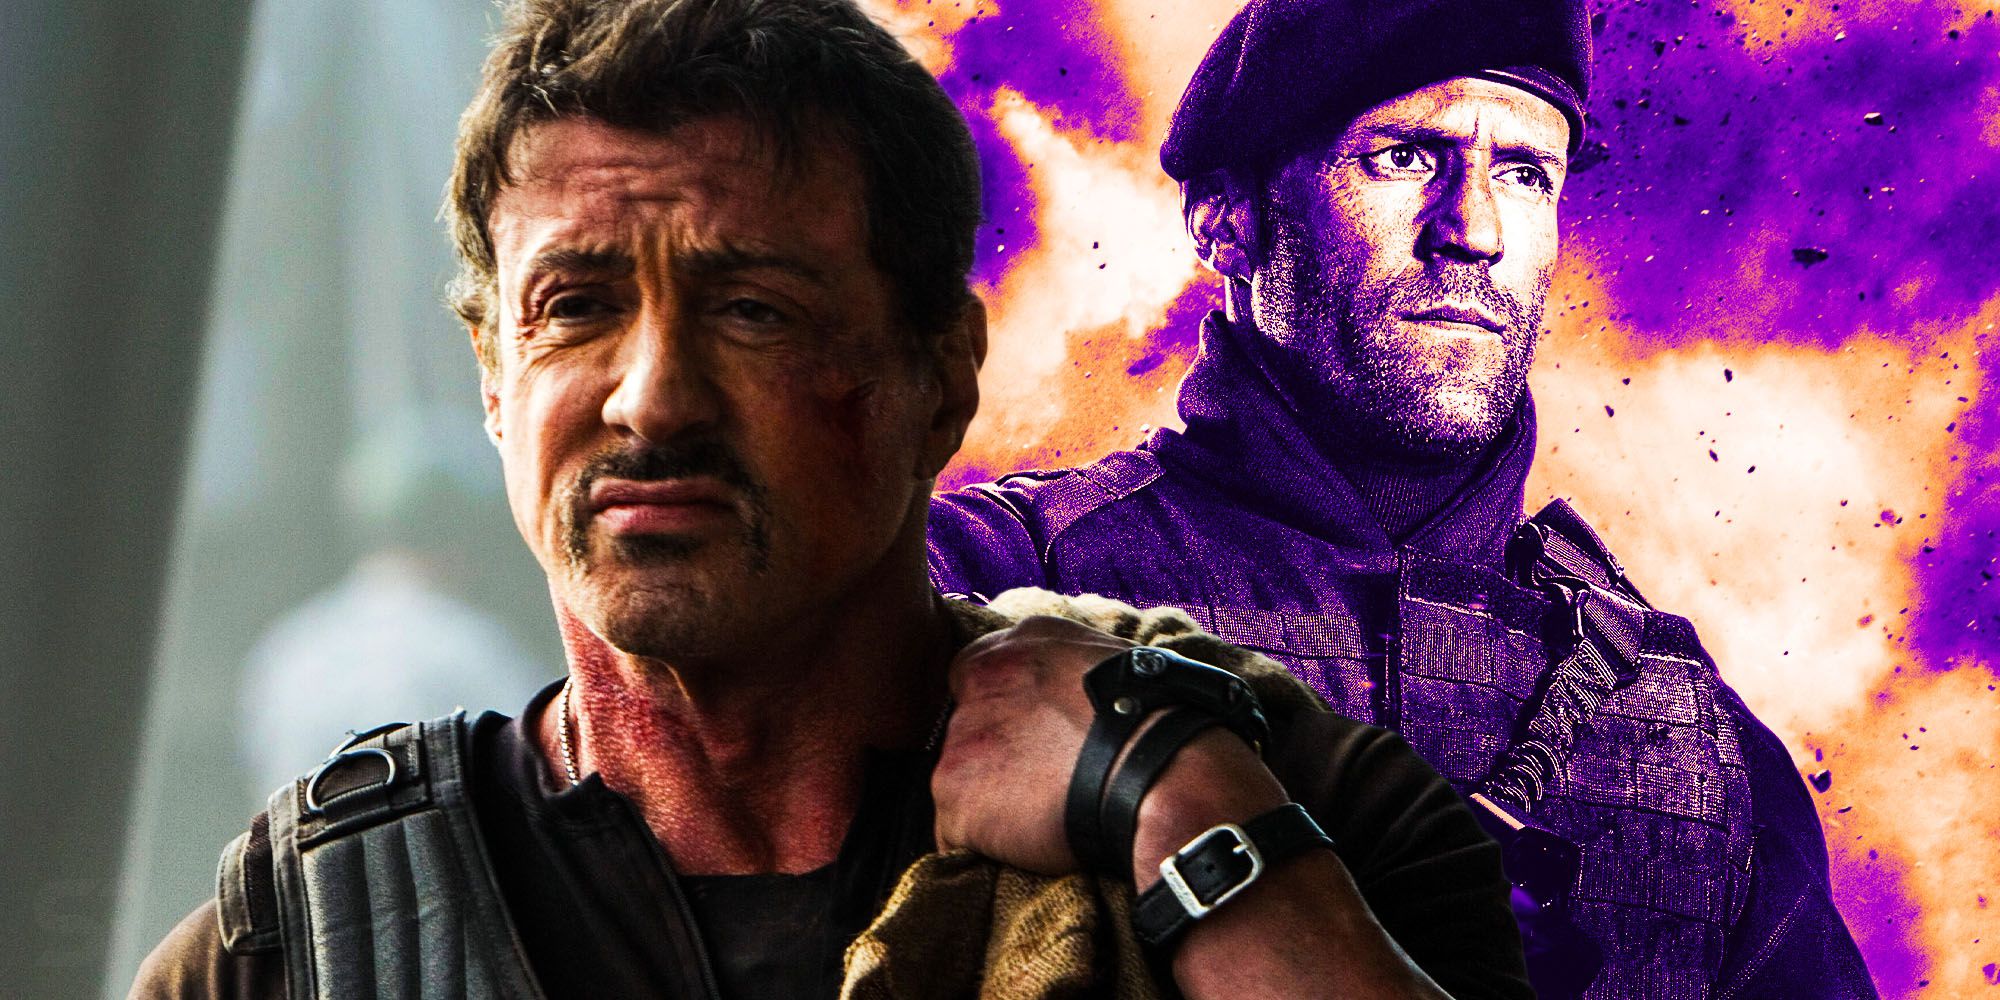 Expendables spinoff Jason Statham character better for Sylvestor Stallone